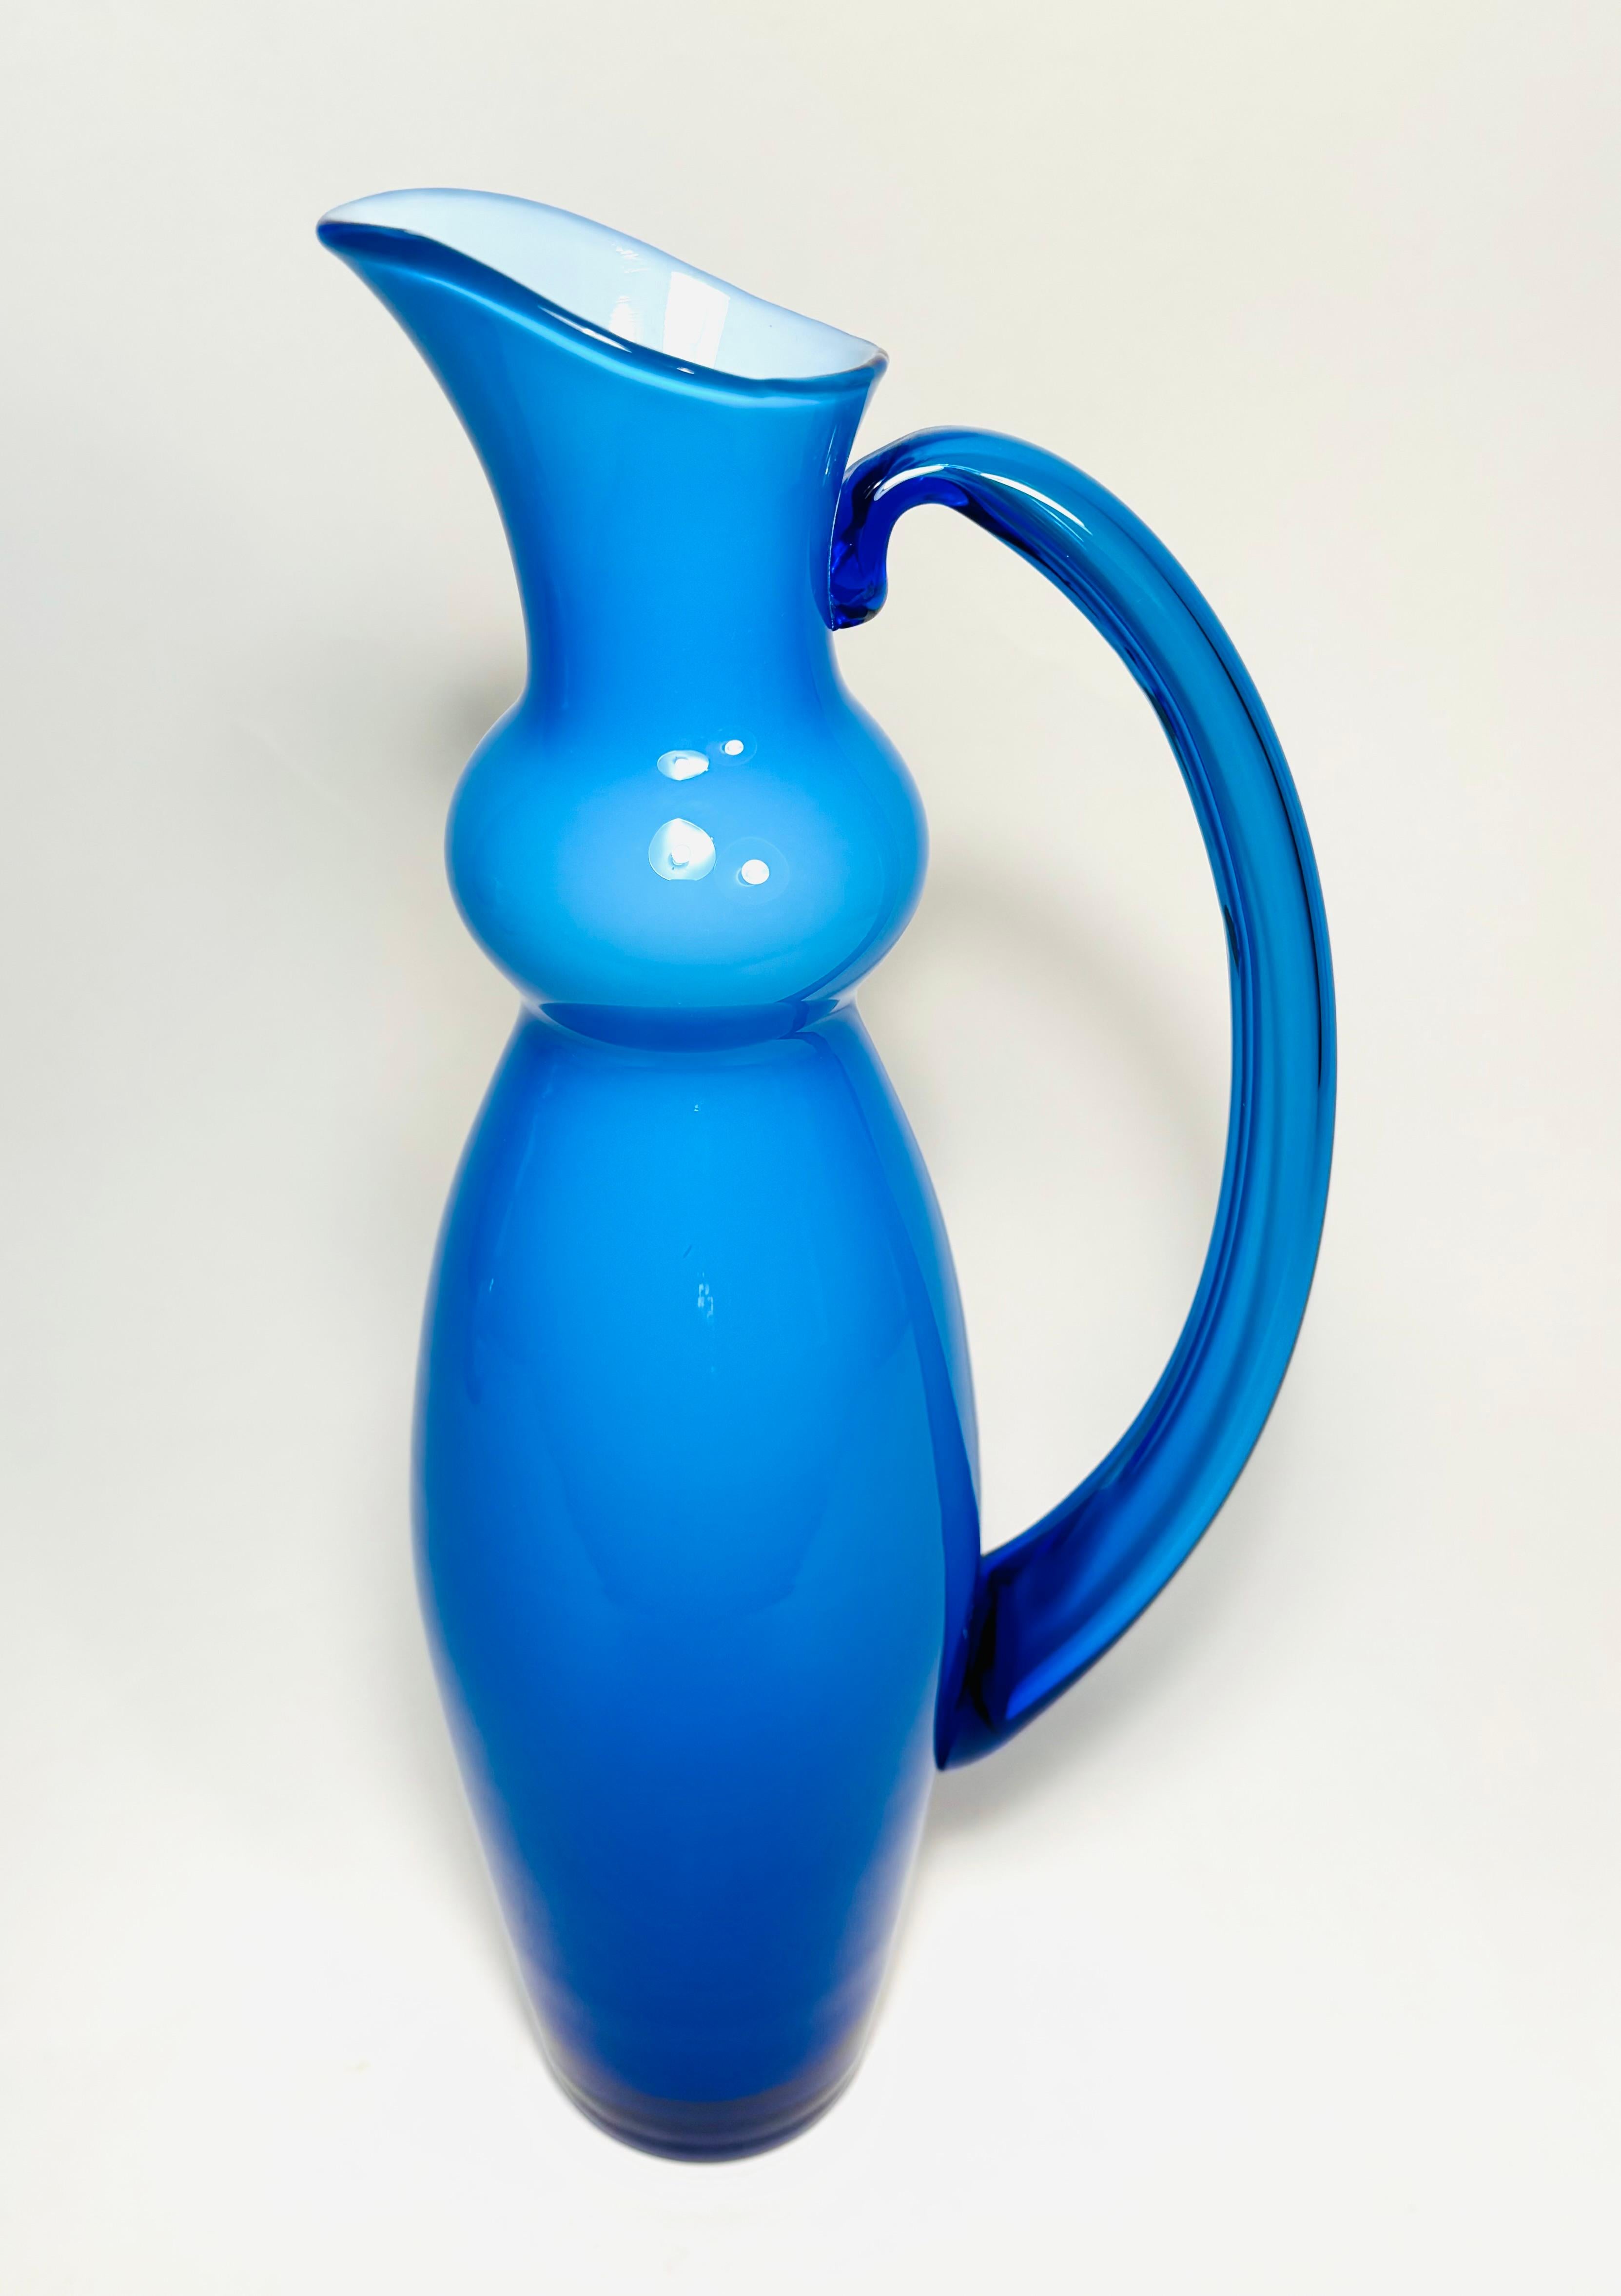 A tall and striking art glass vase by Orrefors, fully hall marked. Cased in a vibrant shade of blue over white this piece is stunning just on its own. In very good vintage condition